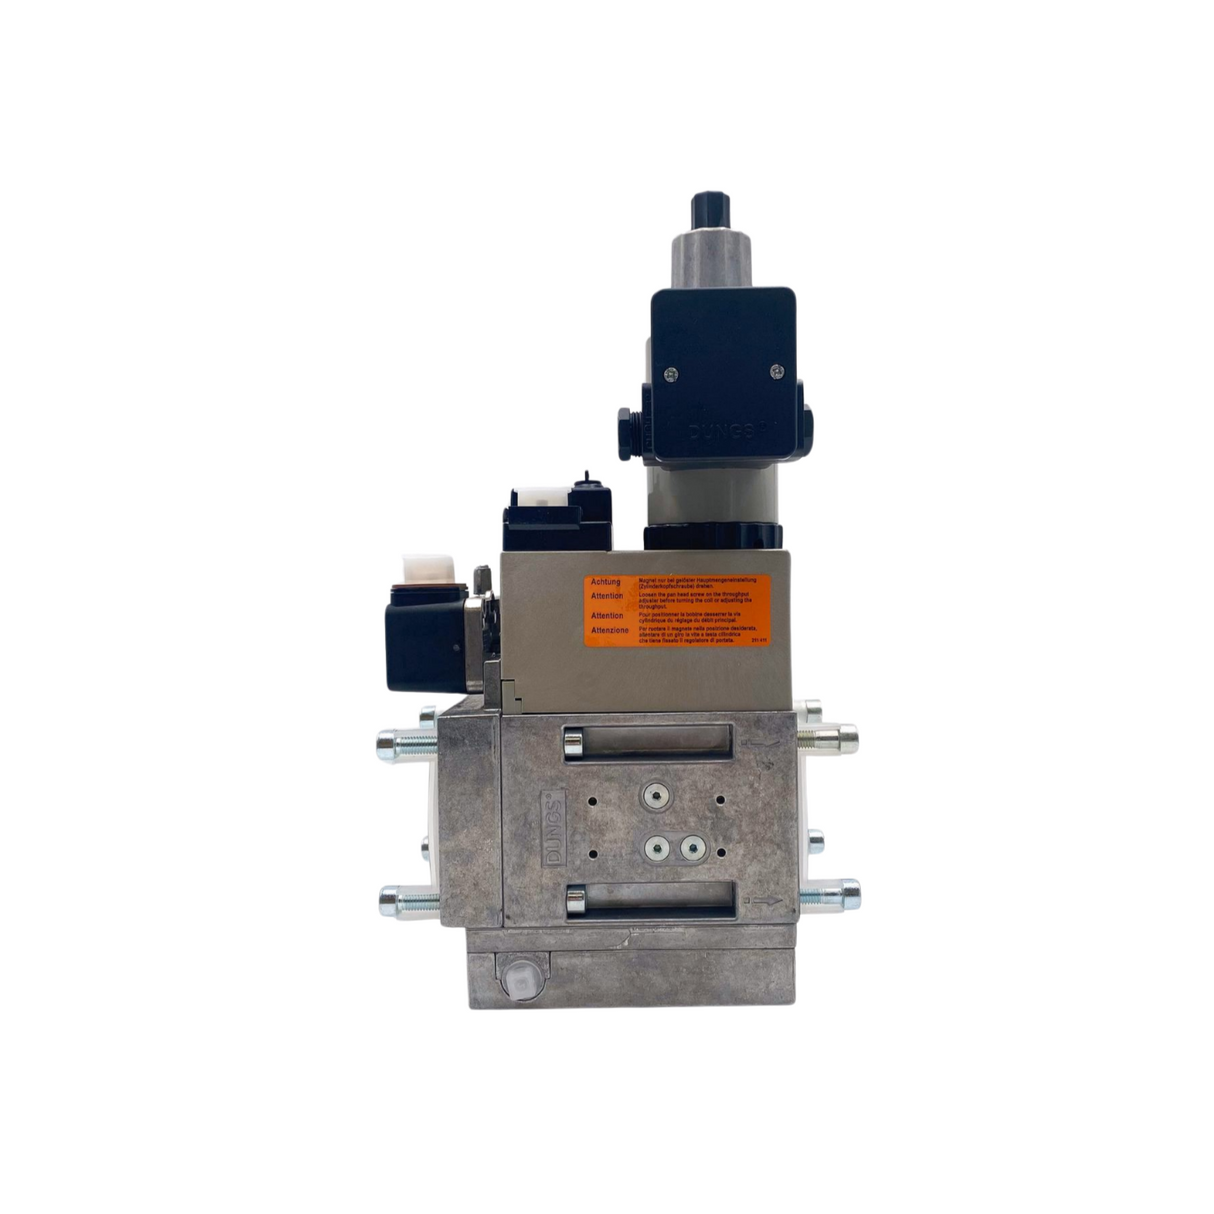 Dungs MB-ZRDLE 415 B01 S50 + GW150 A5 Multibloc Gas Valve - 230v